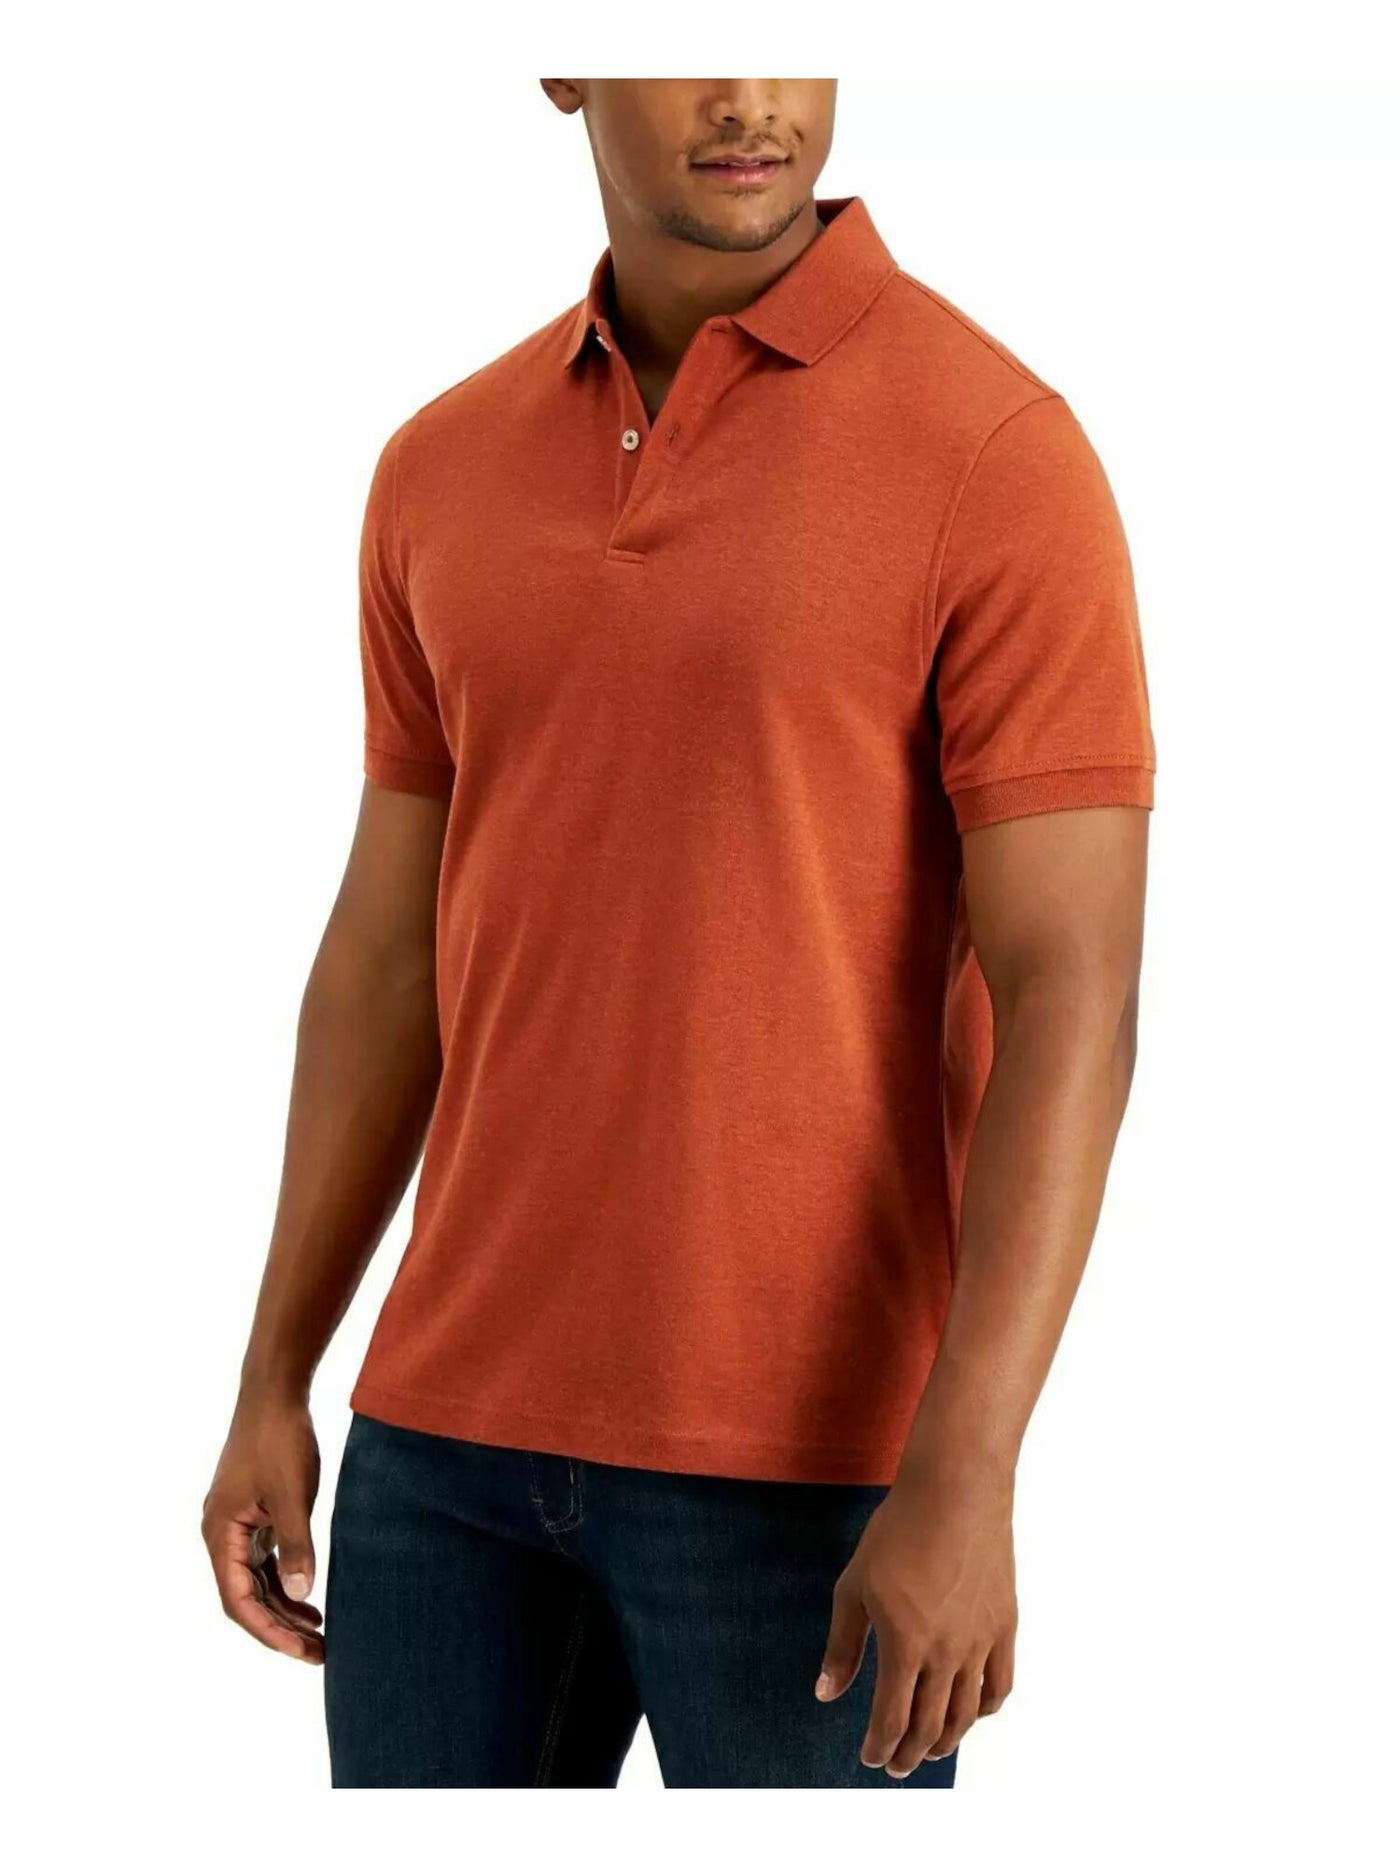 CLUBROOM Mens Soft Touch Interlock Orange Heather Classic Fit Stretch Polo S